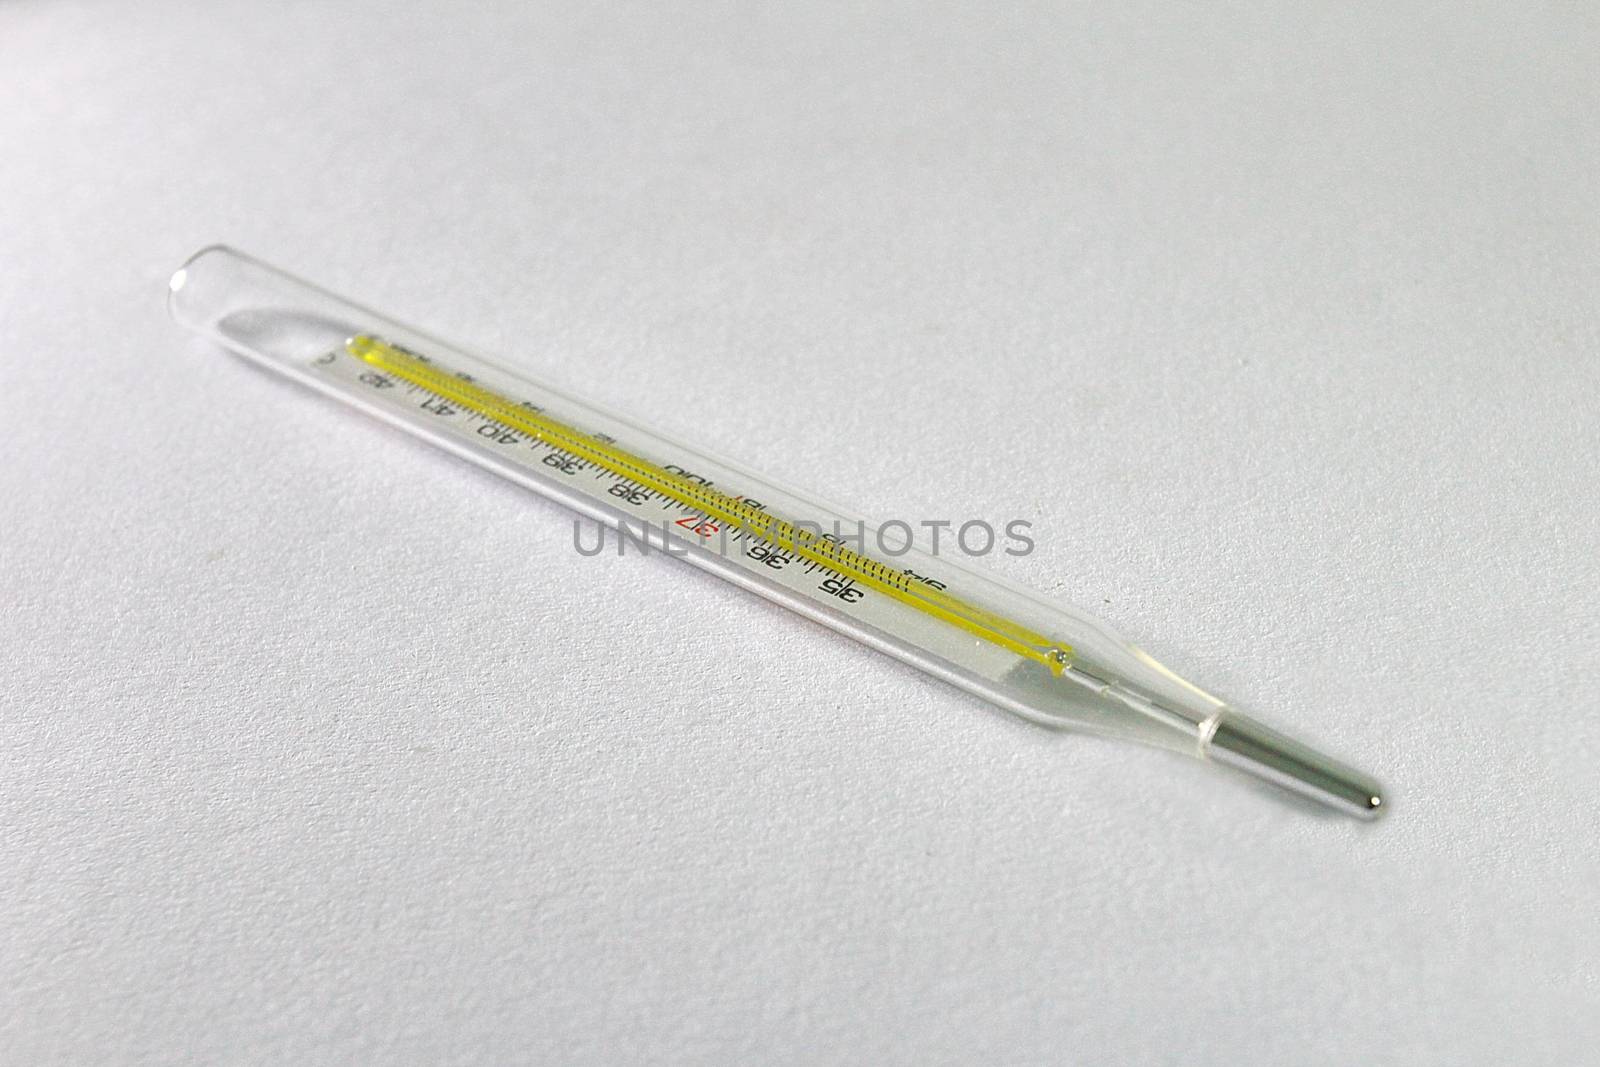 This is a clinical thermometer.Cheaper than digital clinical thermometer.